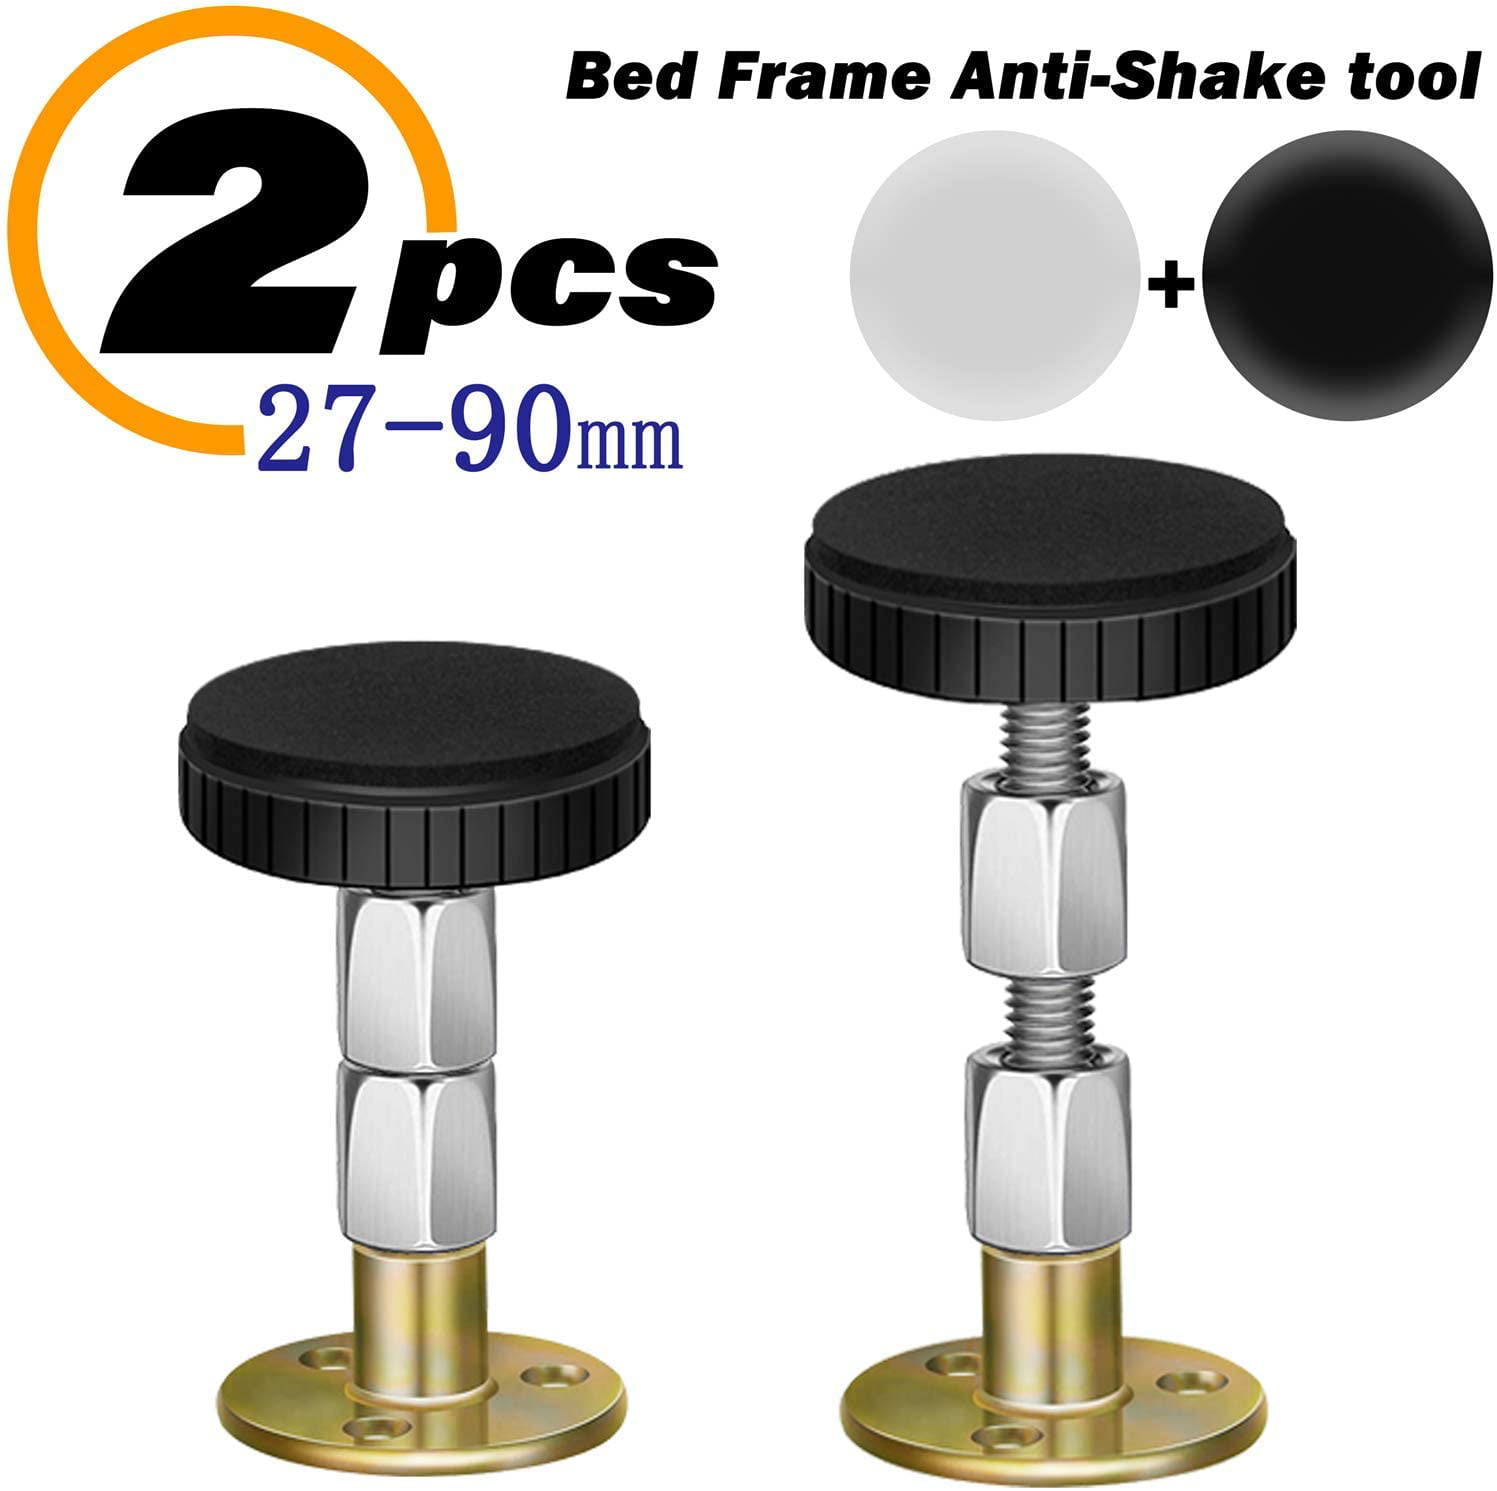 Bed Frame Anti-Shake Tool Adjustable Anti-Shake Fixer Headboard stoppers 2pack 